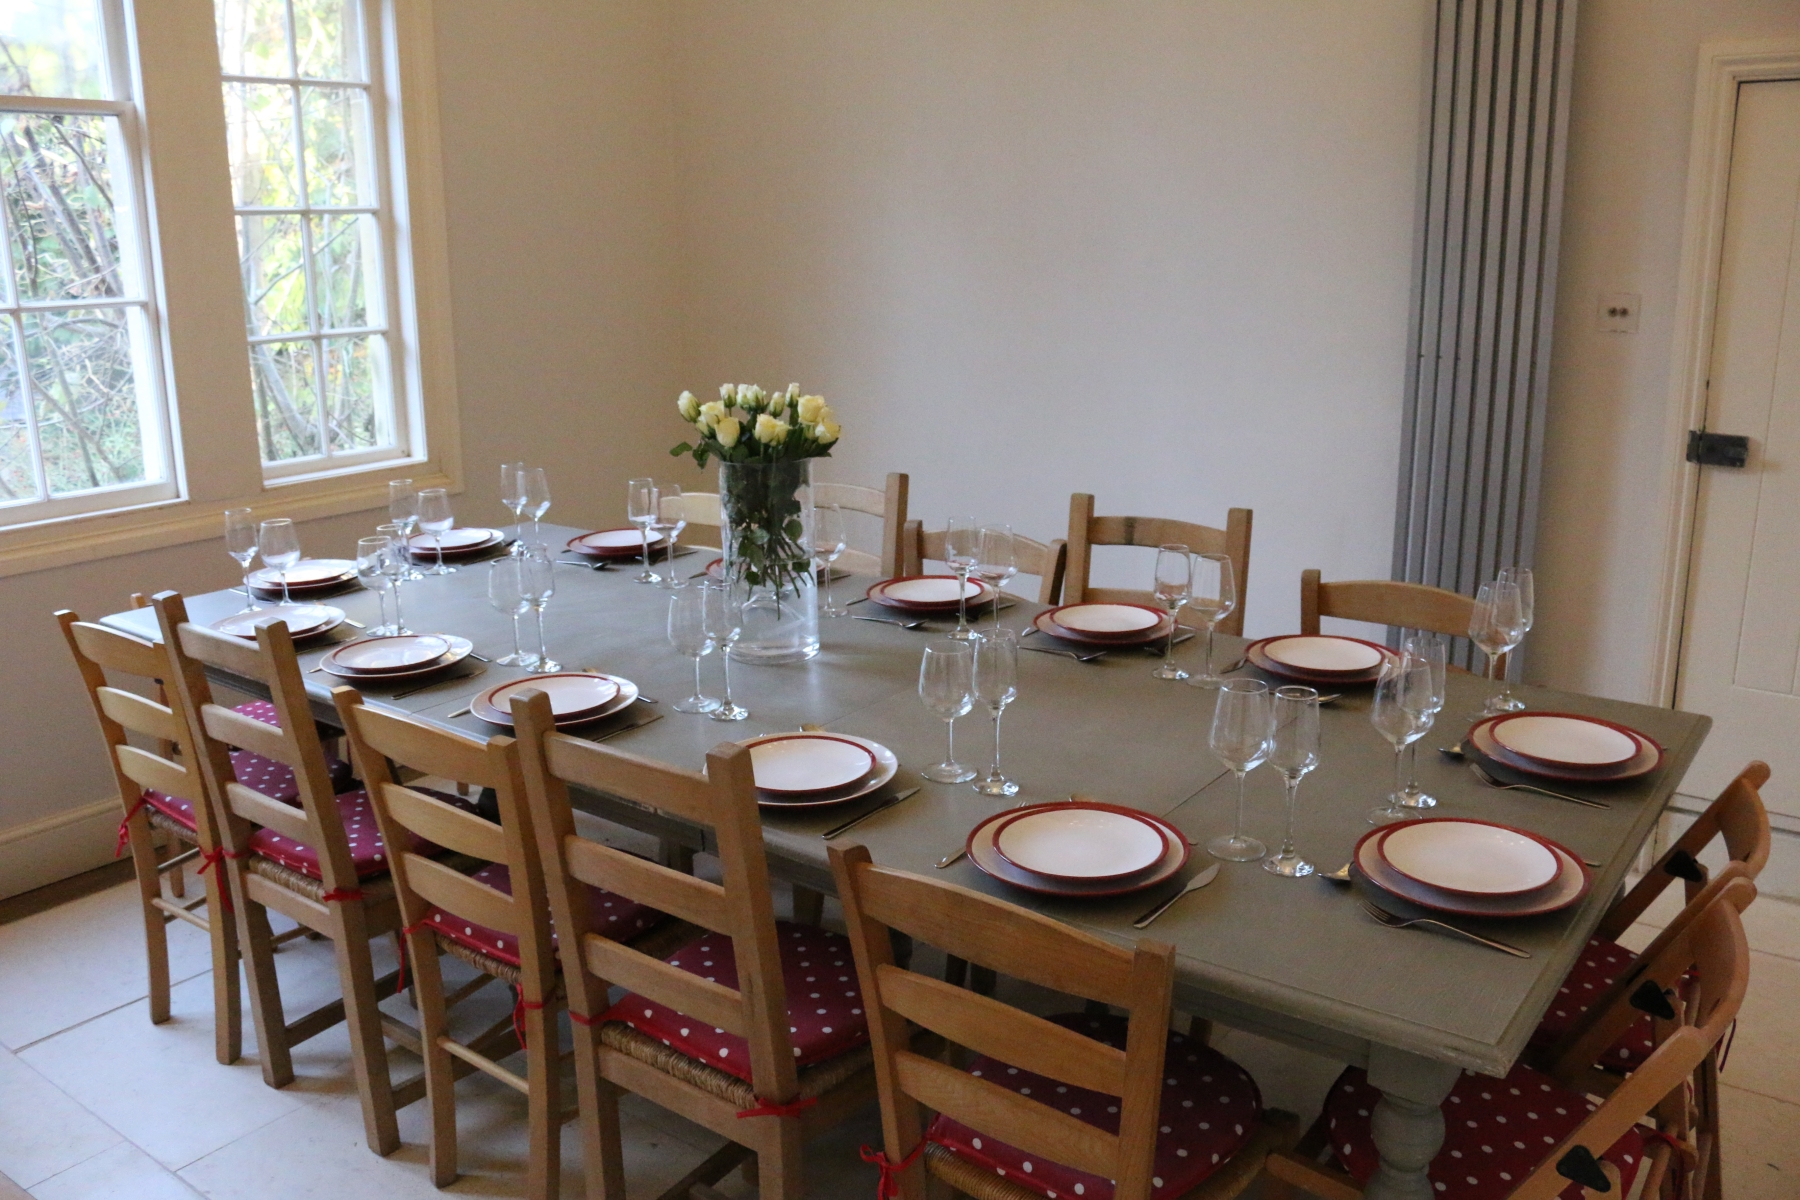 School Rooms Estate - long sociable dining table